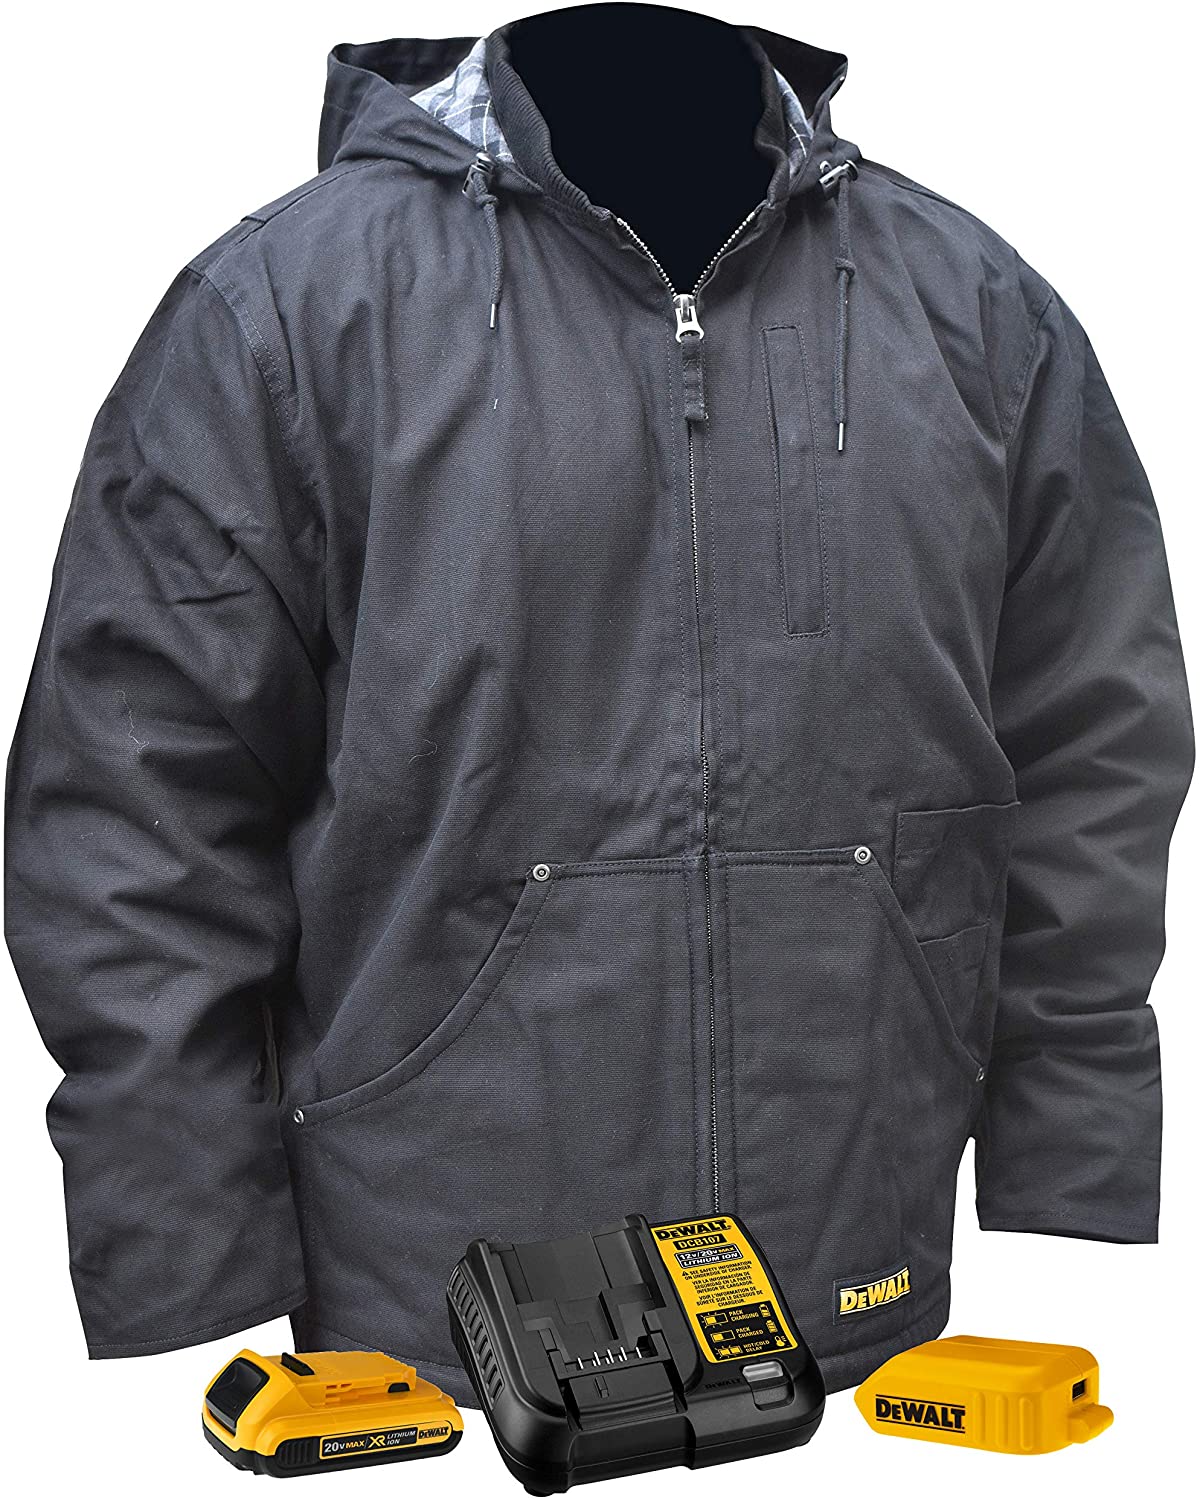 This heated work jacket has a durable water- and wind-resistant duck fabric outer shell and fleece polyester lining